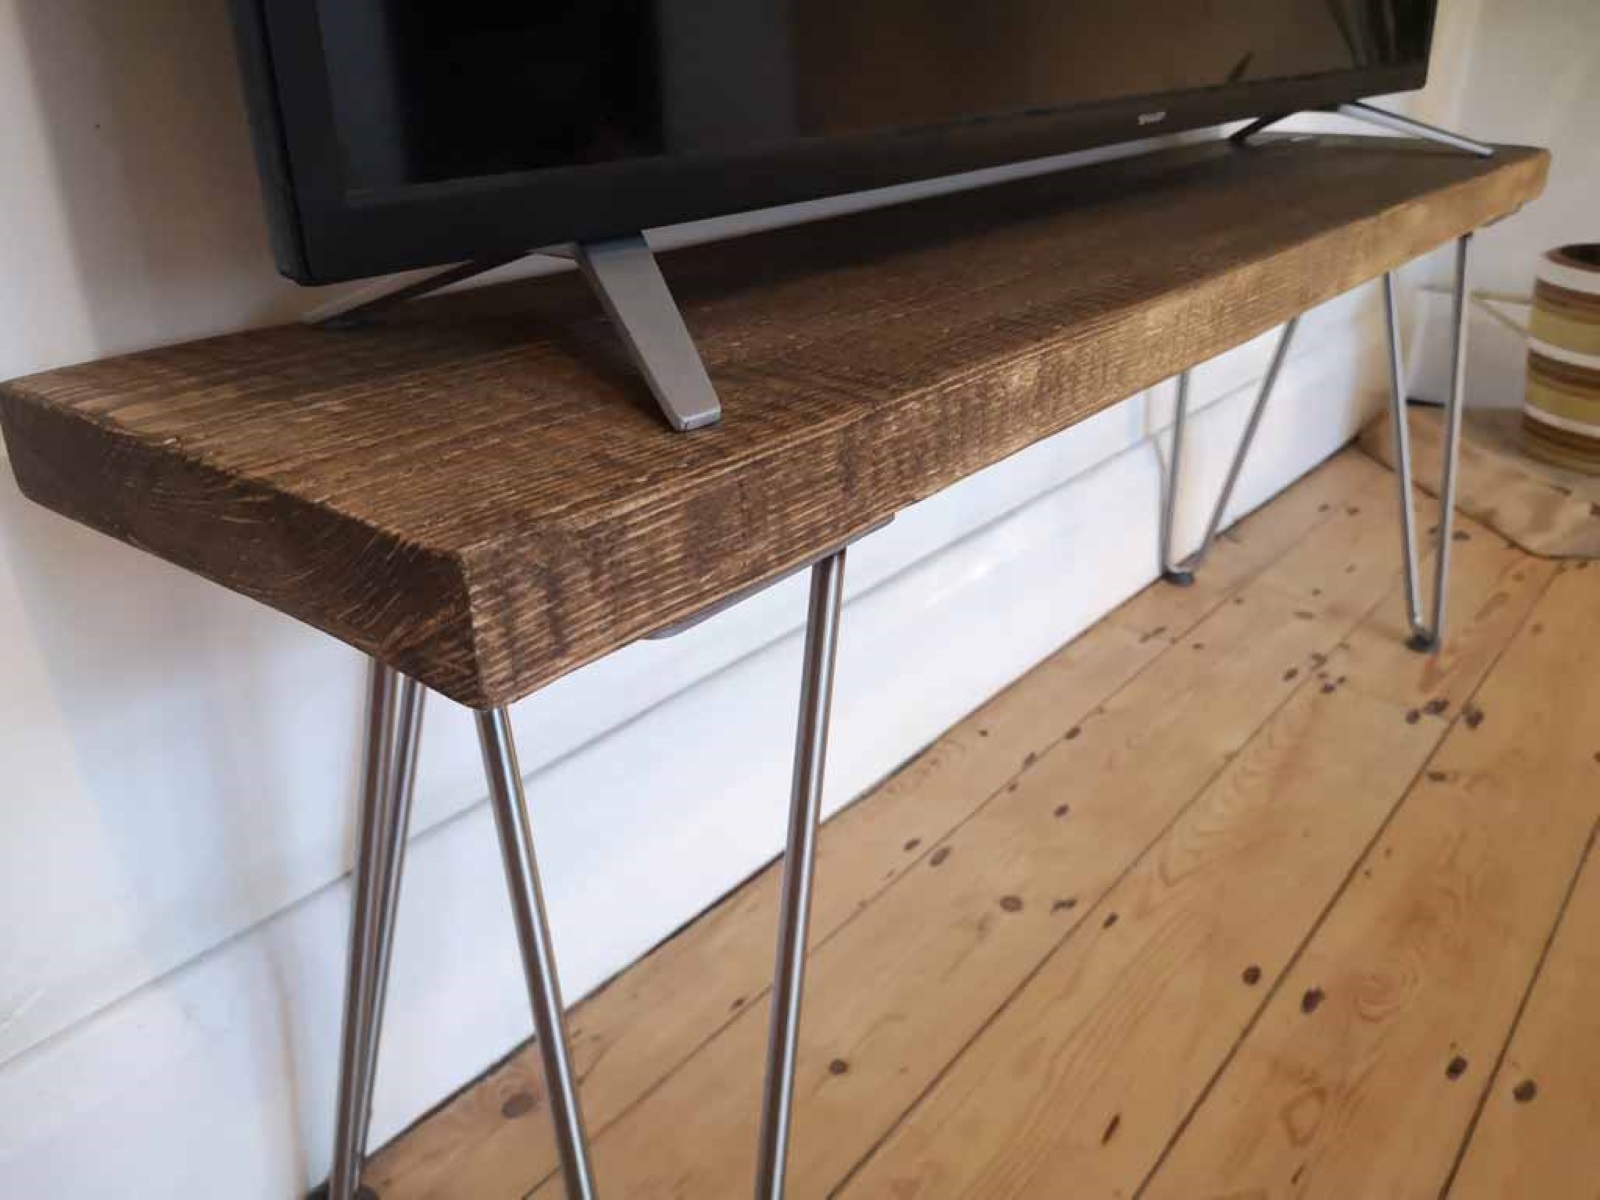 How To Remove Sony TV Stand Legs